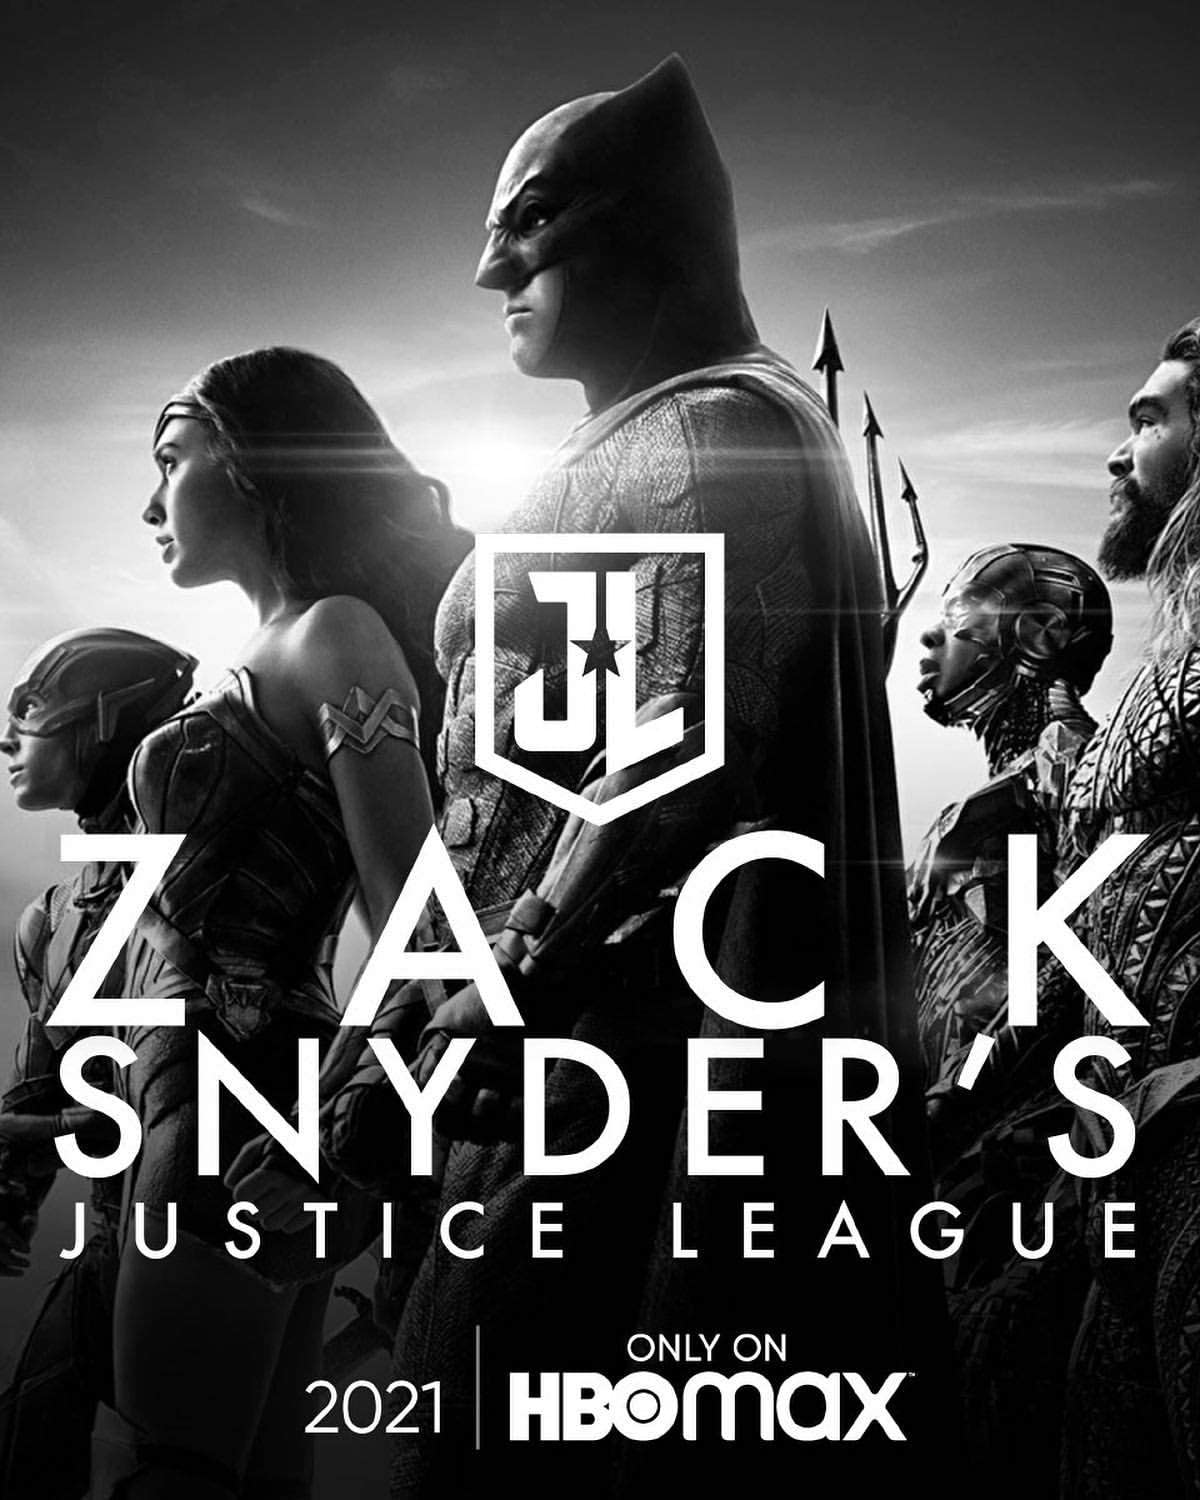 Giclee Poster Snyder's Justice League (Re Release) 2020 12x18: Posters & Prints